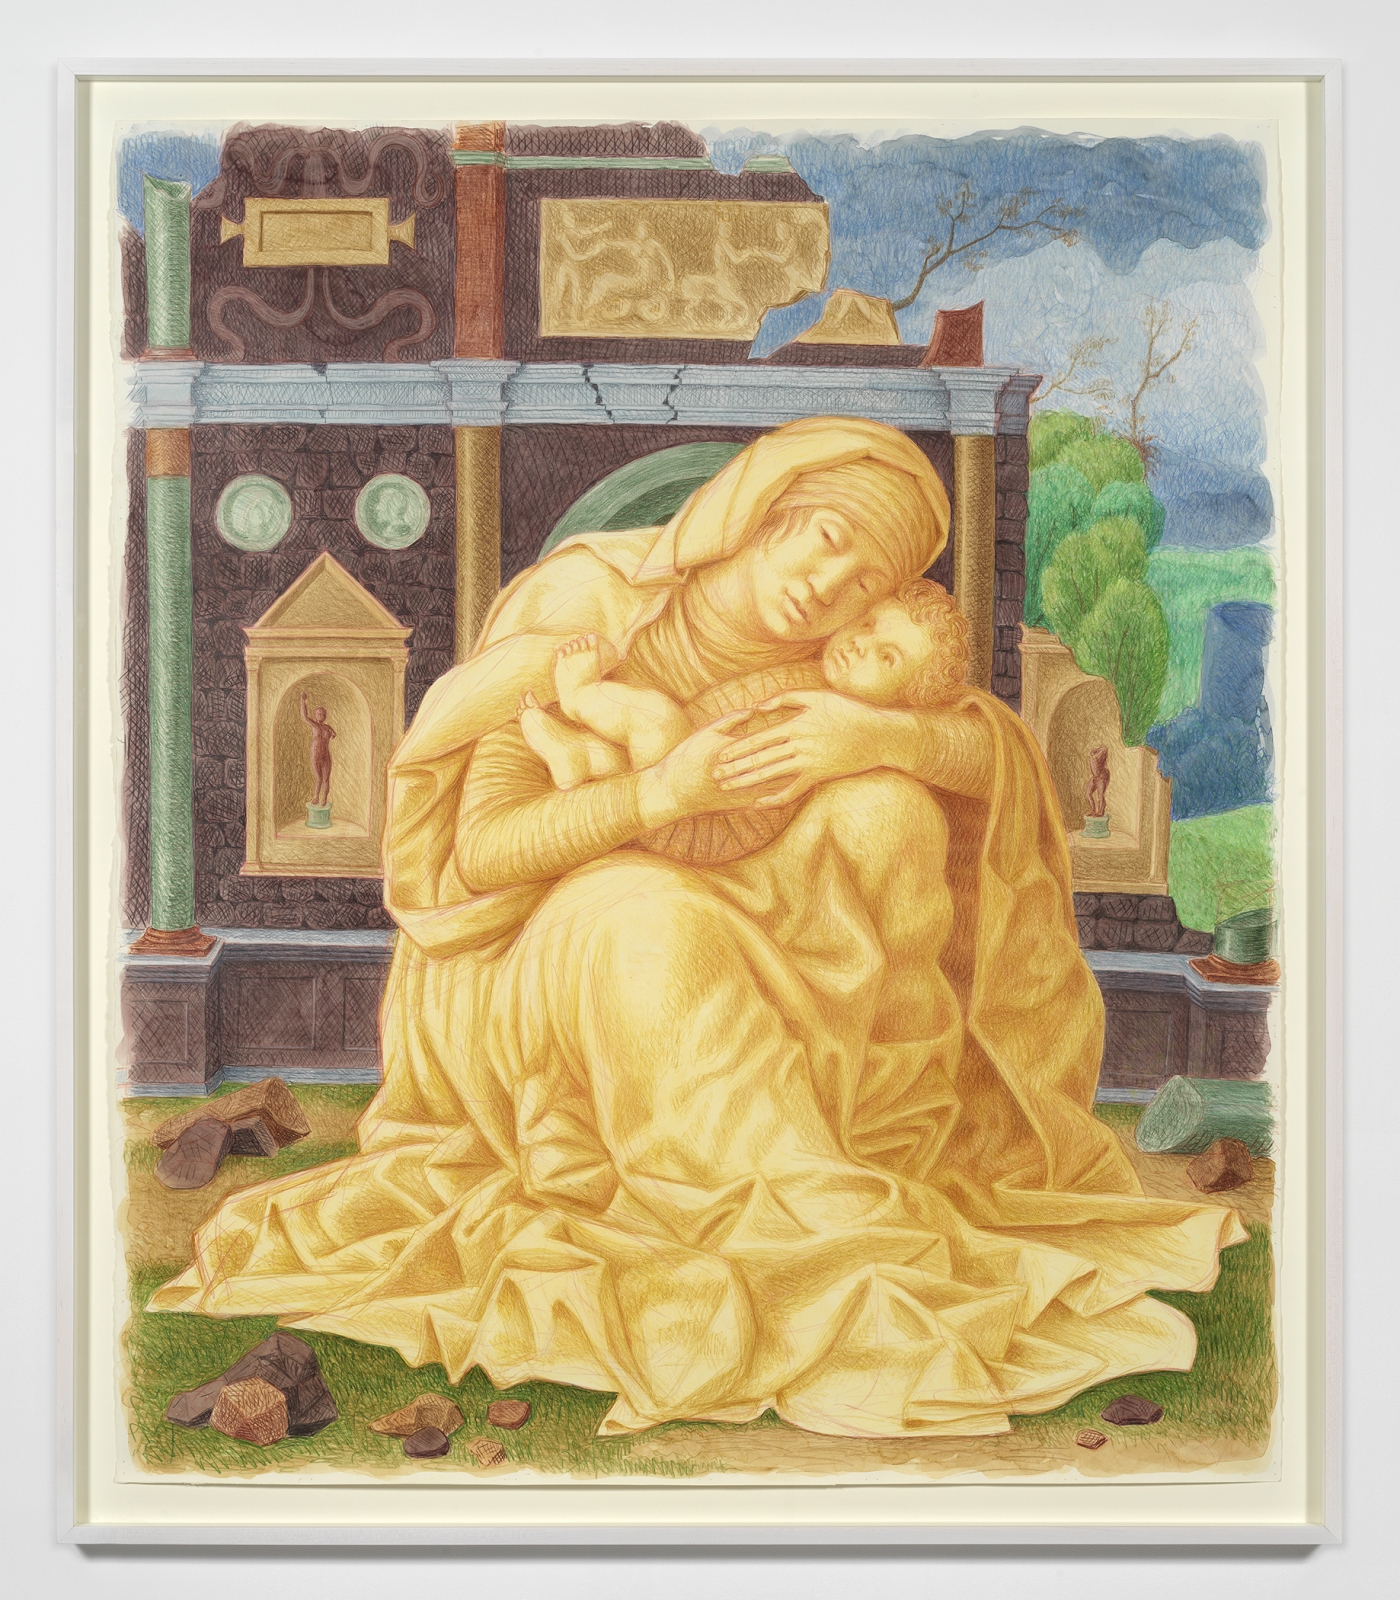 Elijah Burgher
Mary Amongst the Ruins (after Mantegna), 2021
colored pencil and watercolor on paper
44 1/2 x 44 7/8 ins.
113 x 114 cm